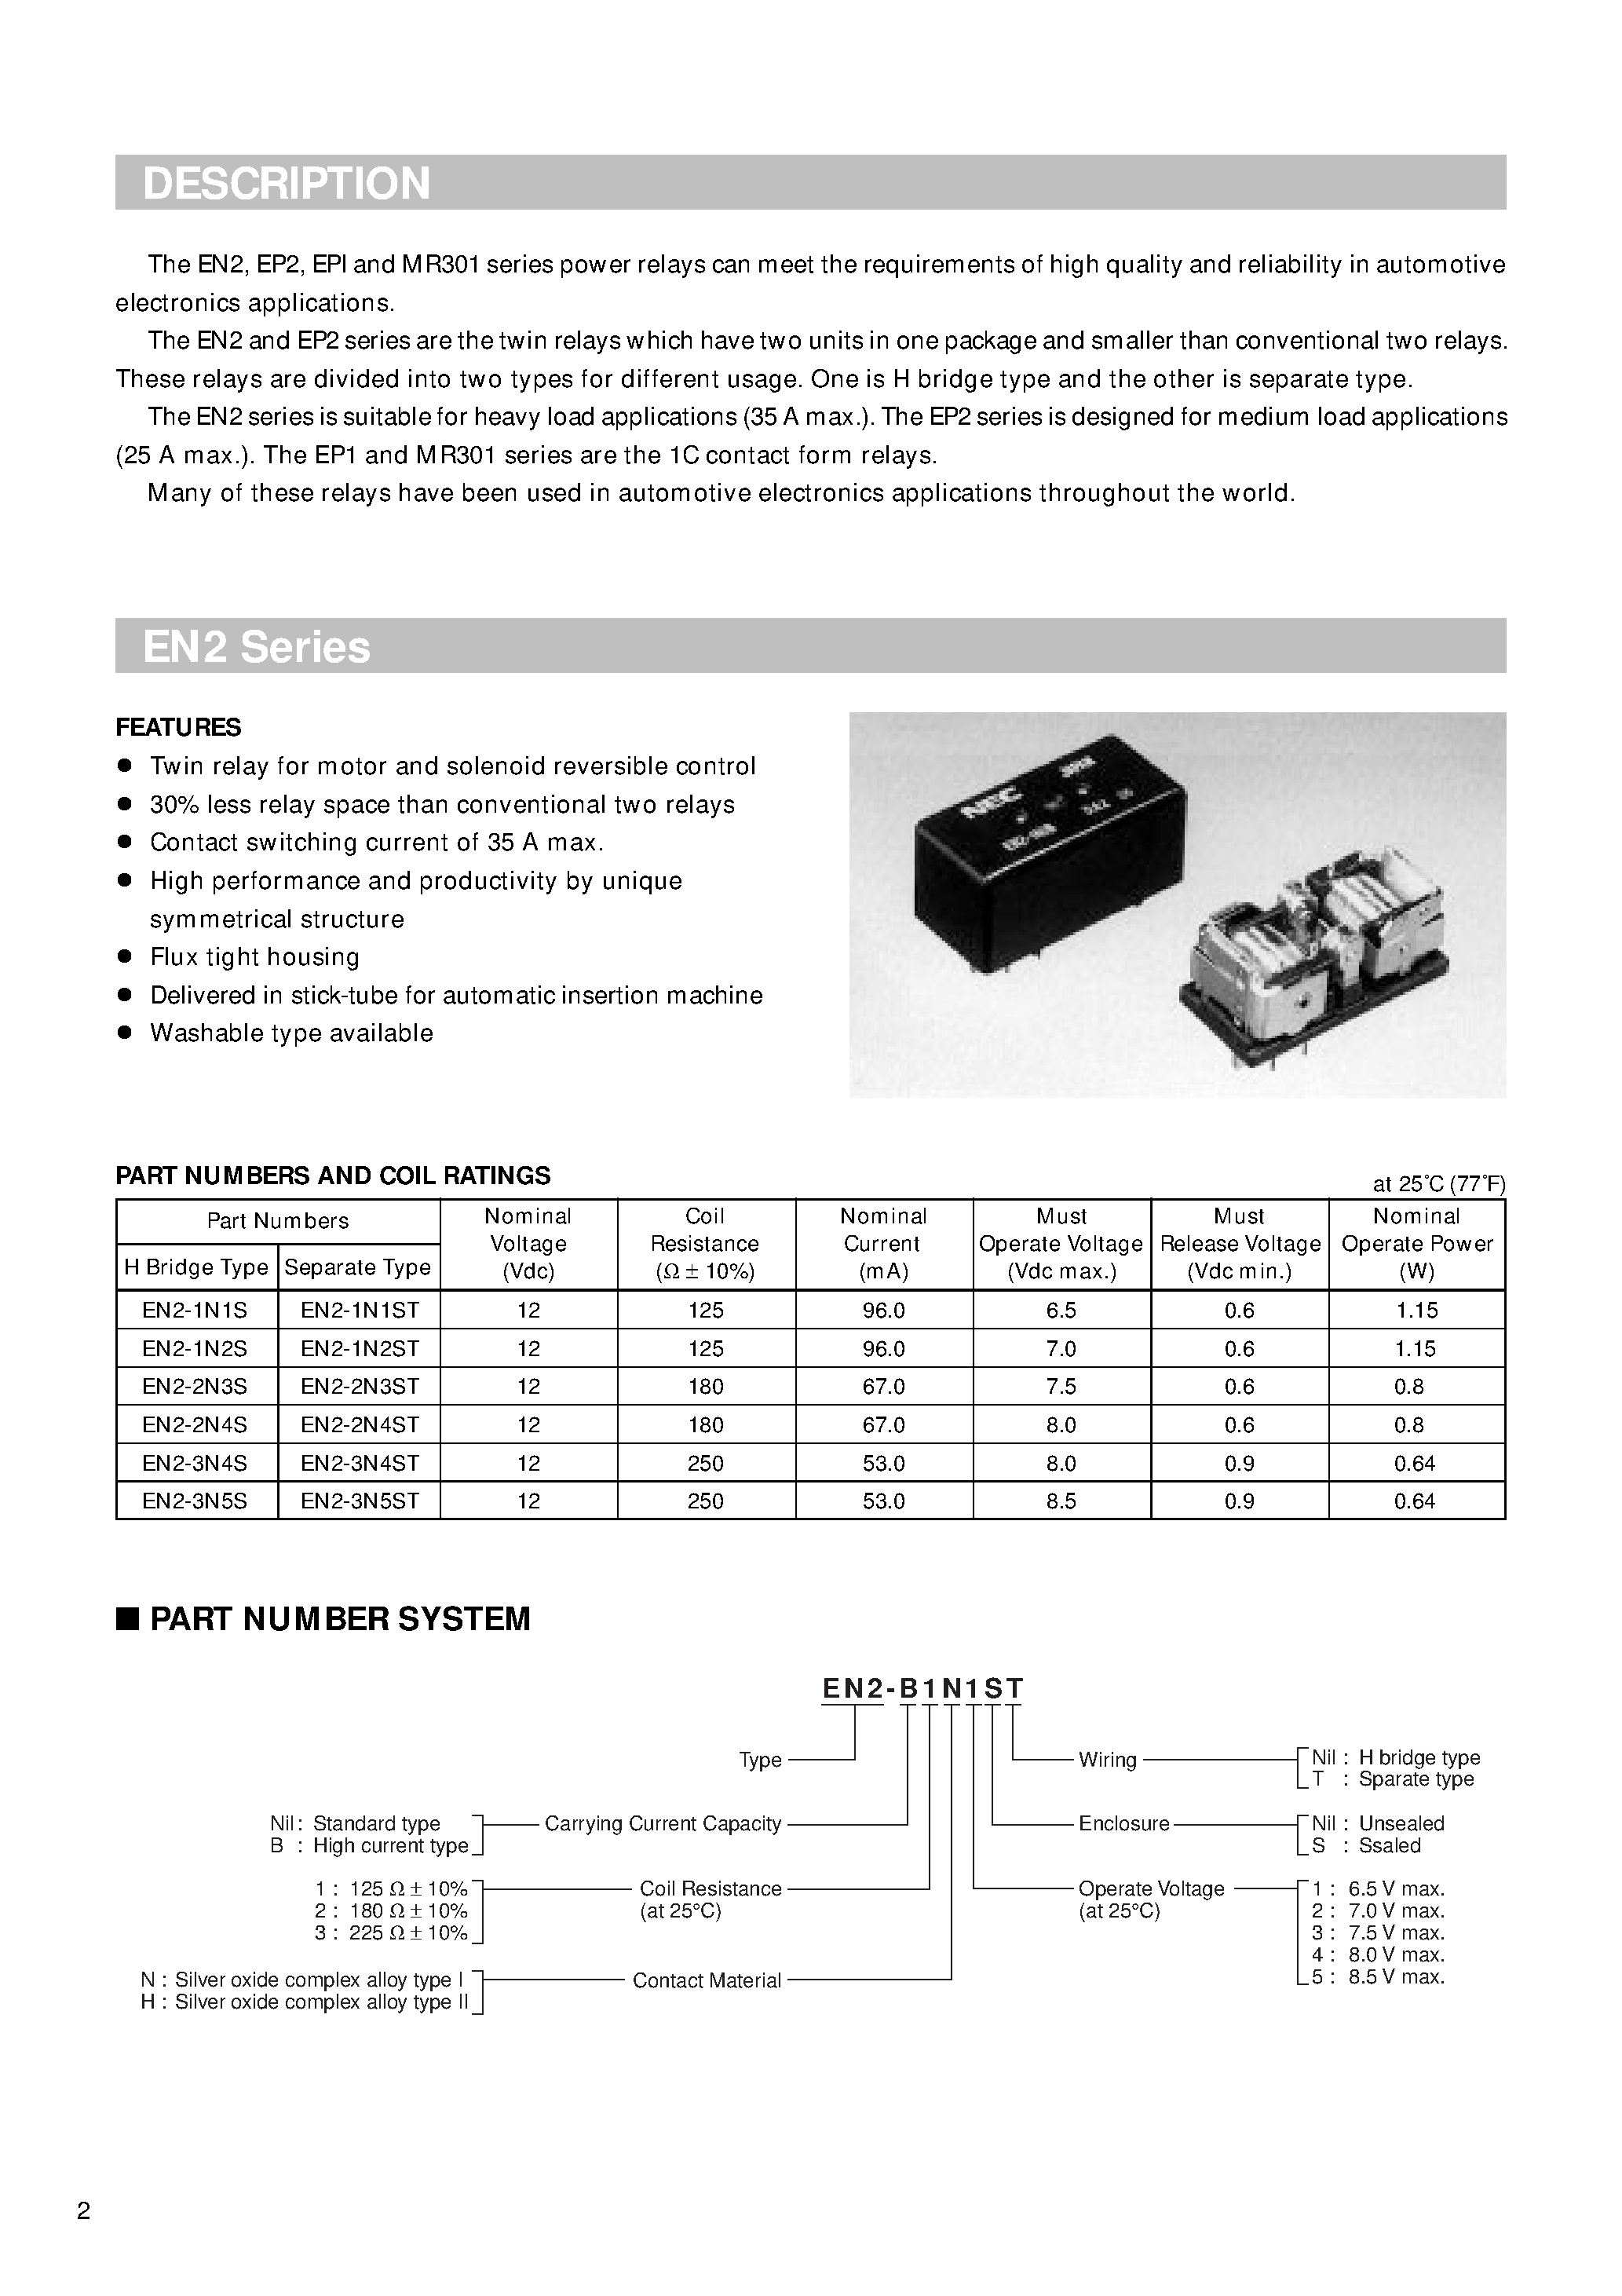 Даташит EN2-2N3S - Twin relay for motor and solenoid reversible control страница 2